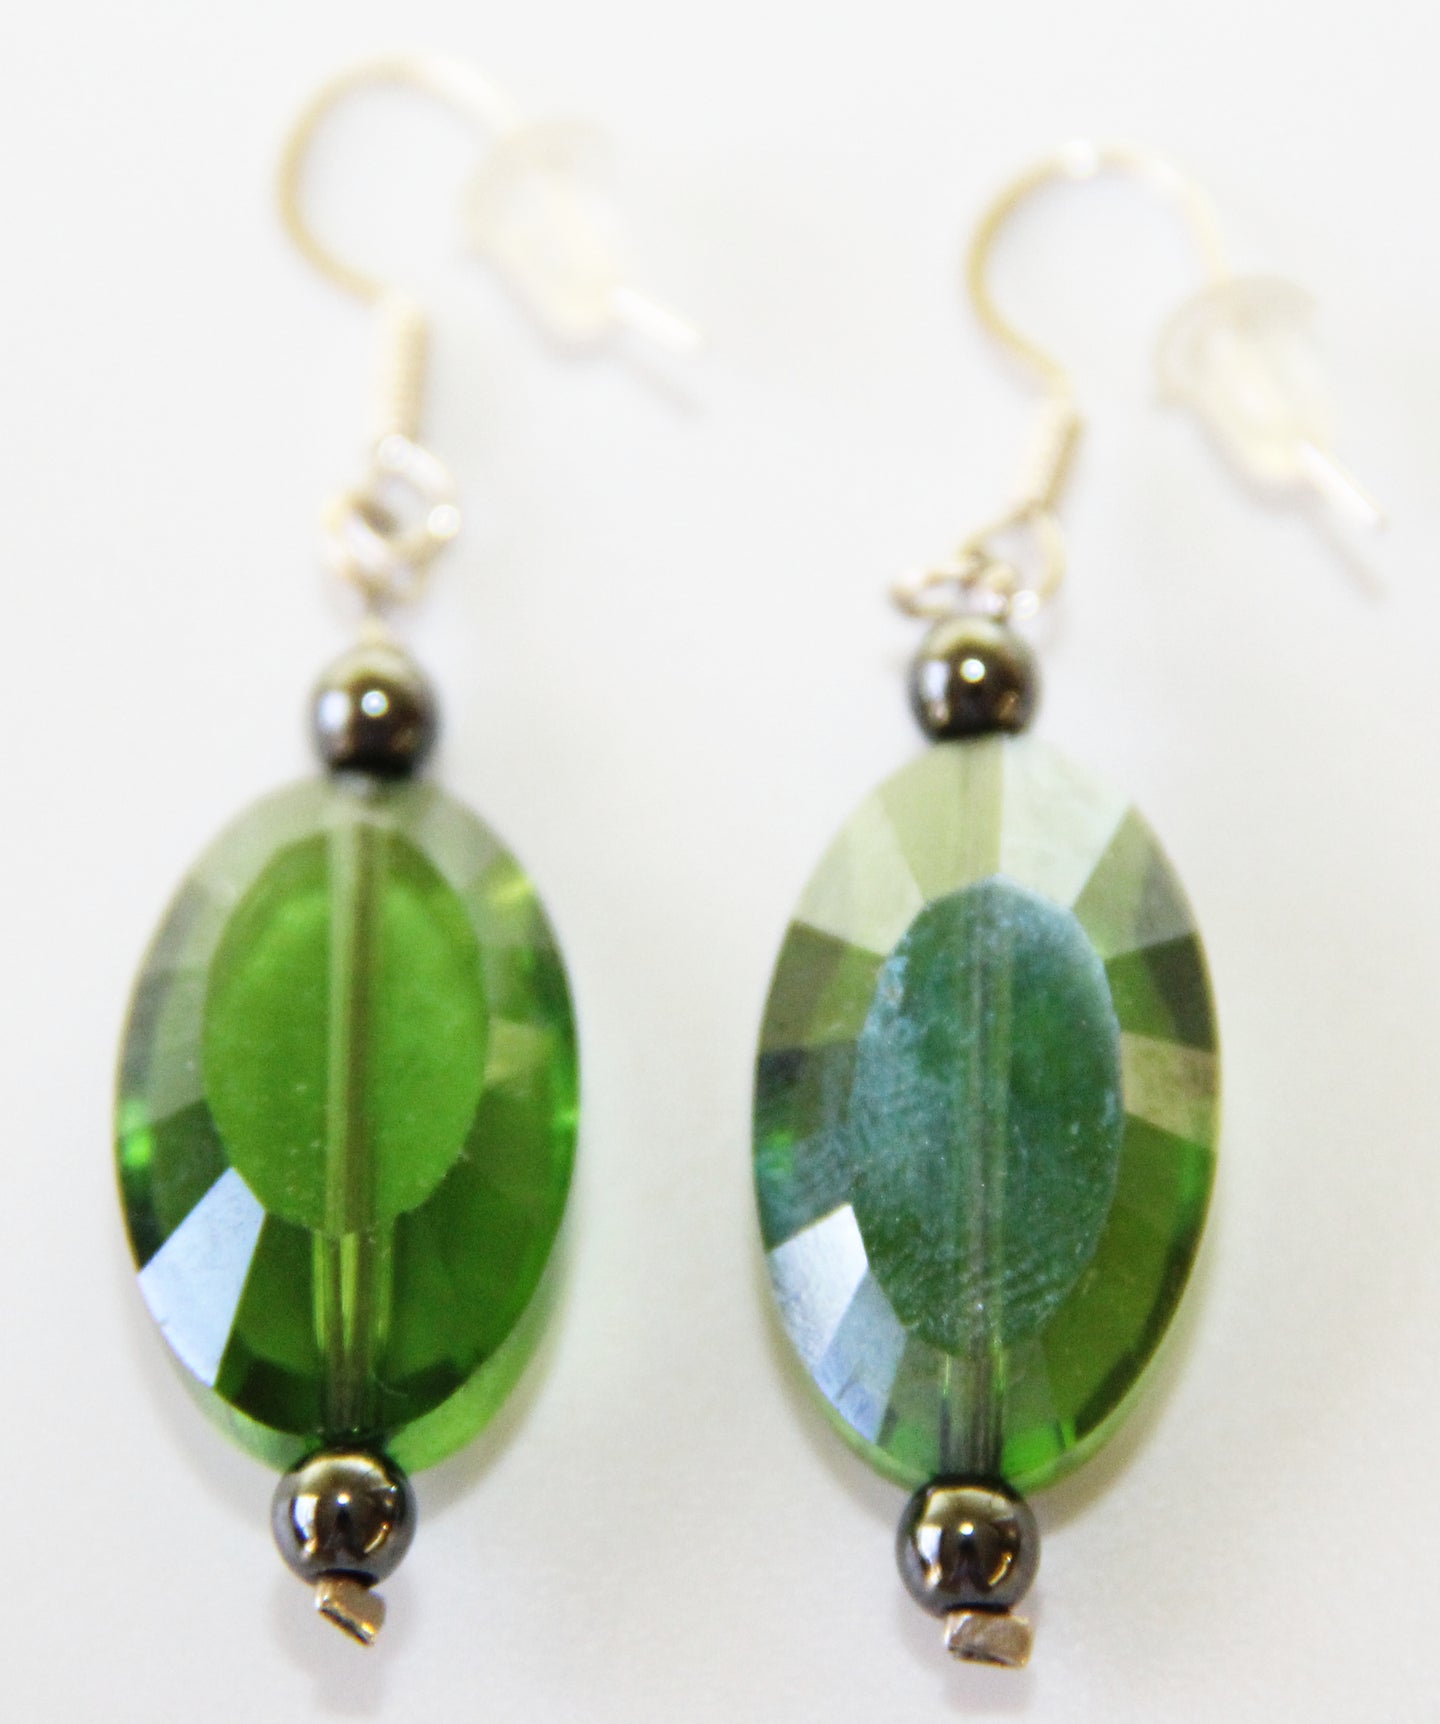 Oval Faceted Emerald Green Crystal Stones Earrings